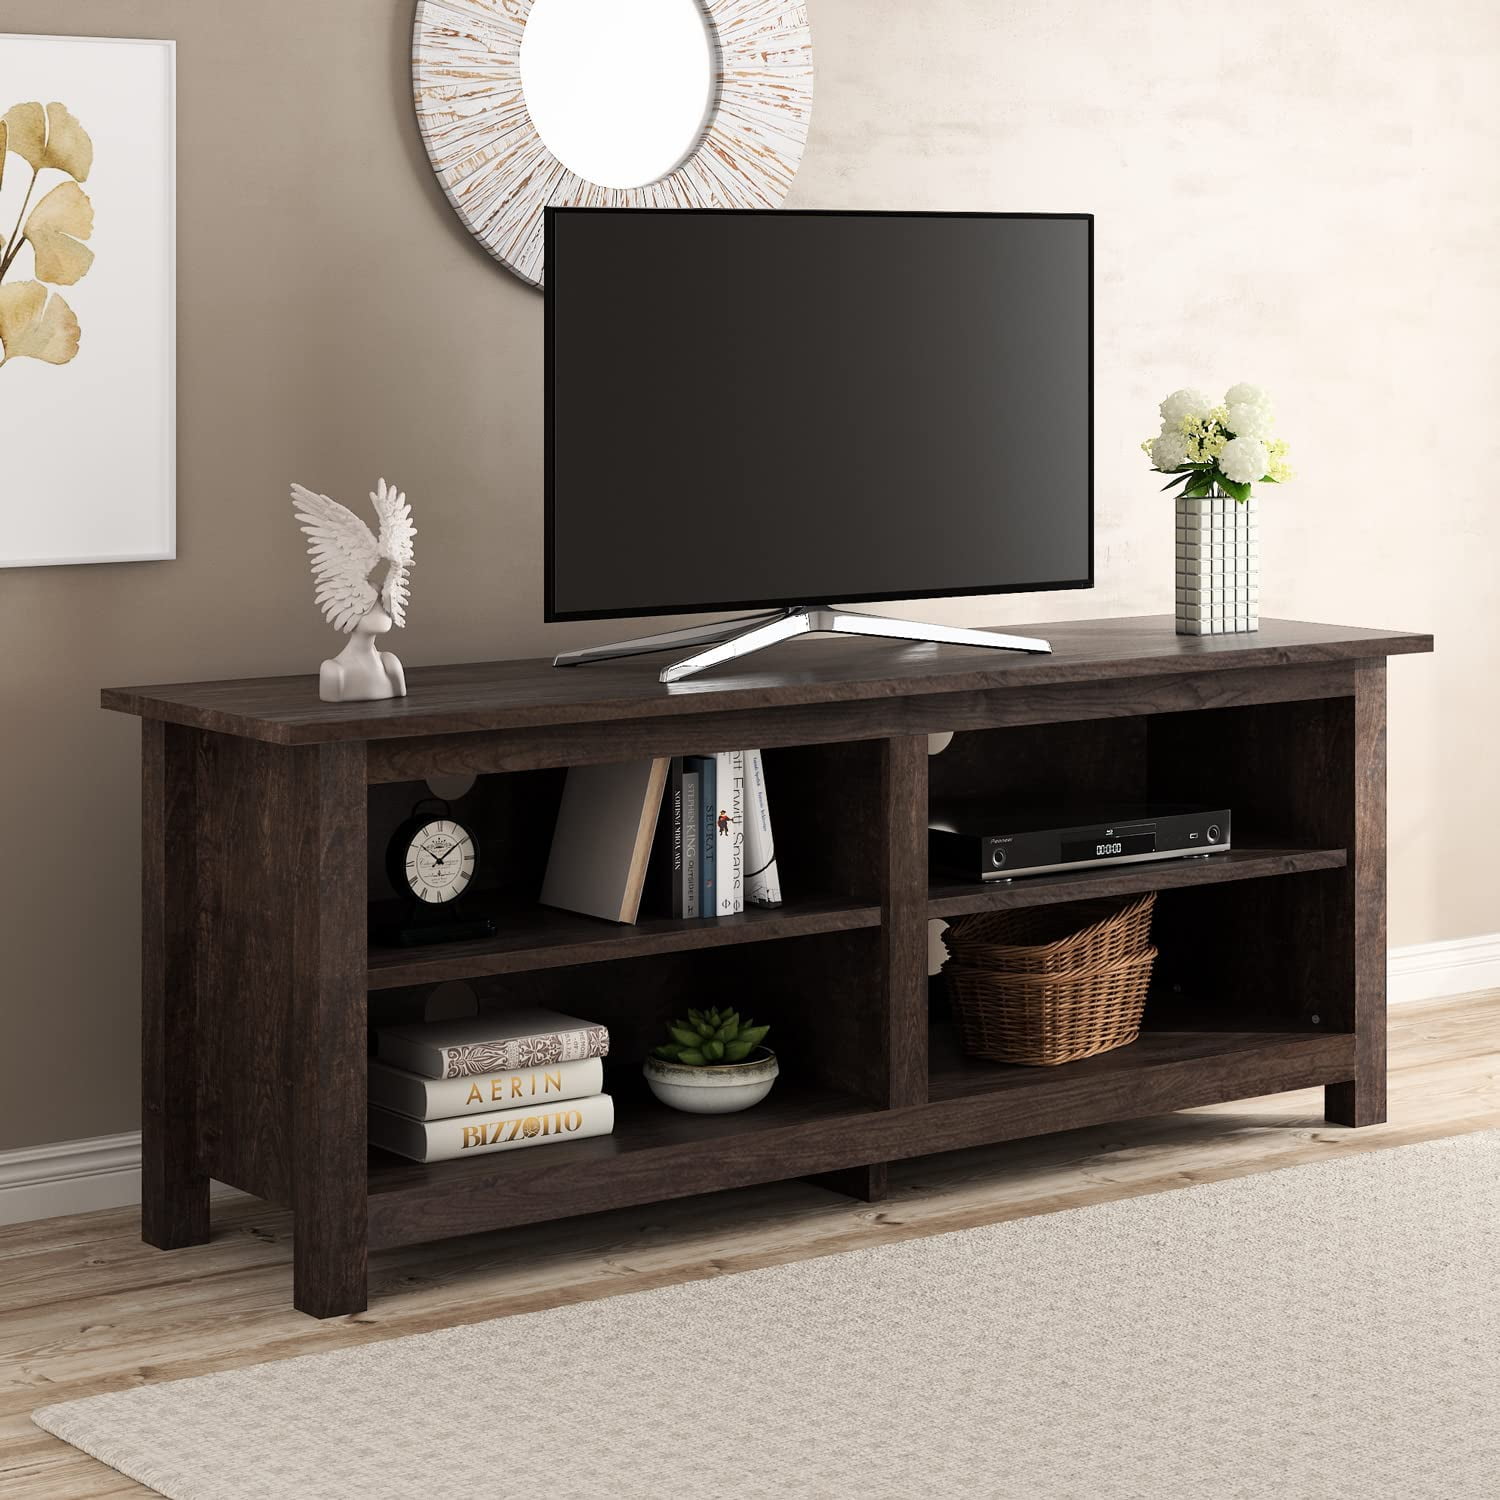 Tv Stand For 55 Inch Tv Flat Screens With Mount Entertainment Center Storage Gre 